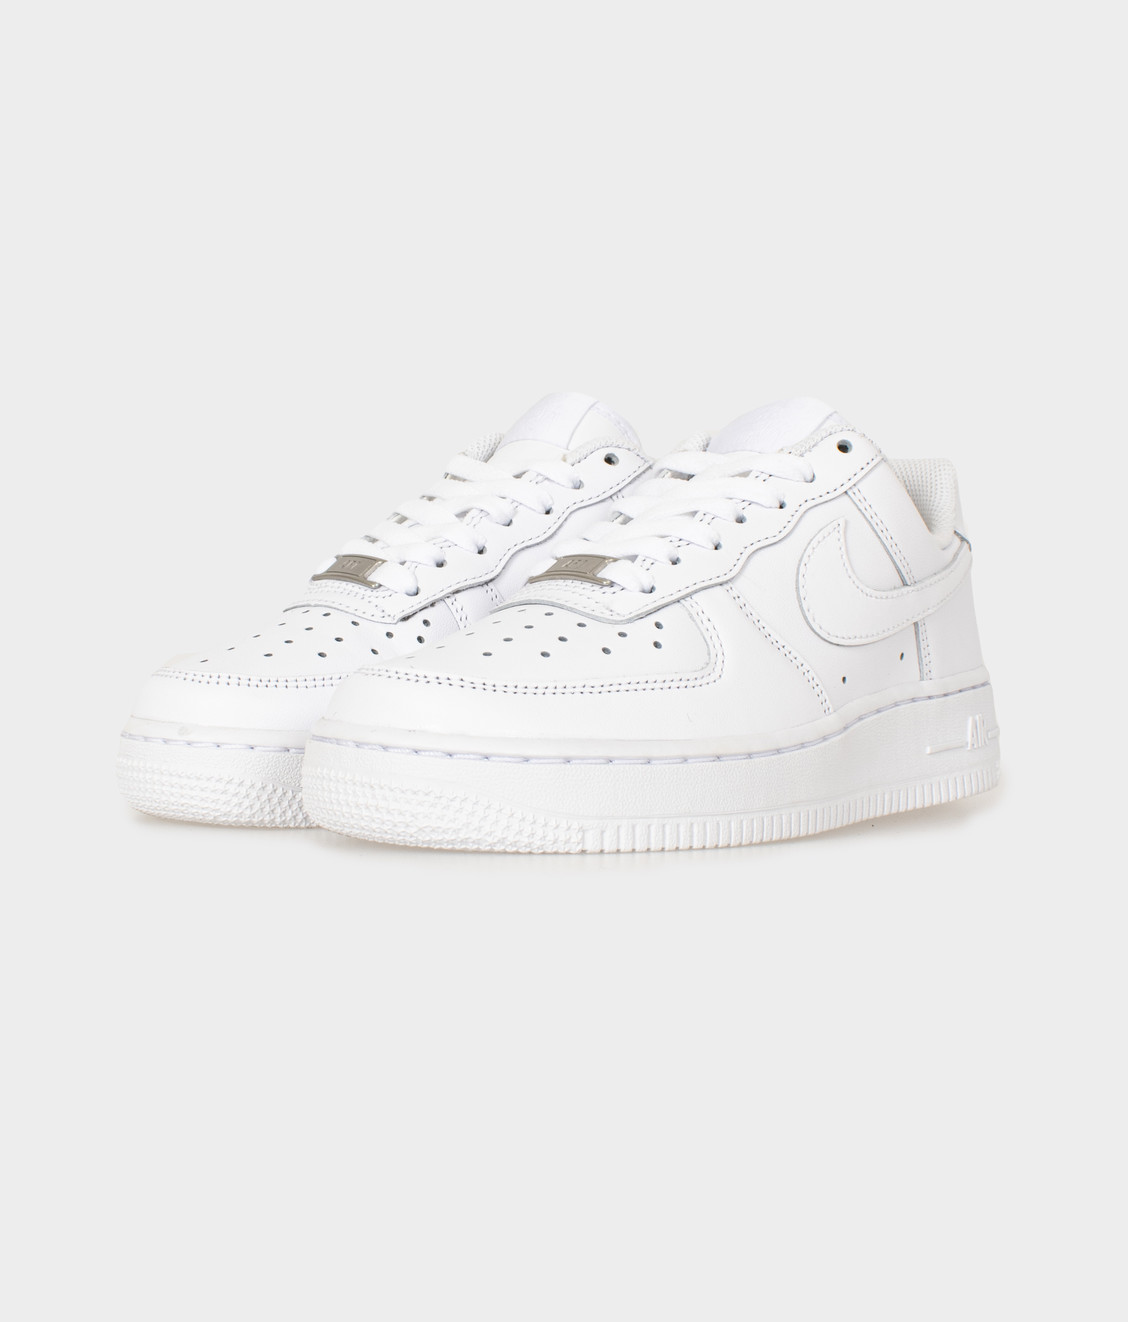 nike air force 1 07 size